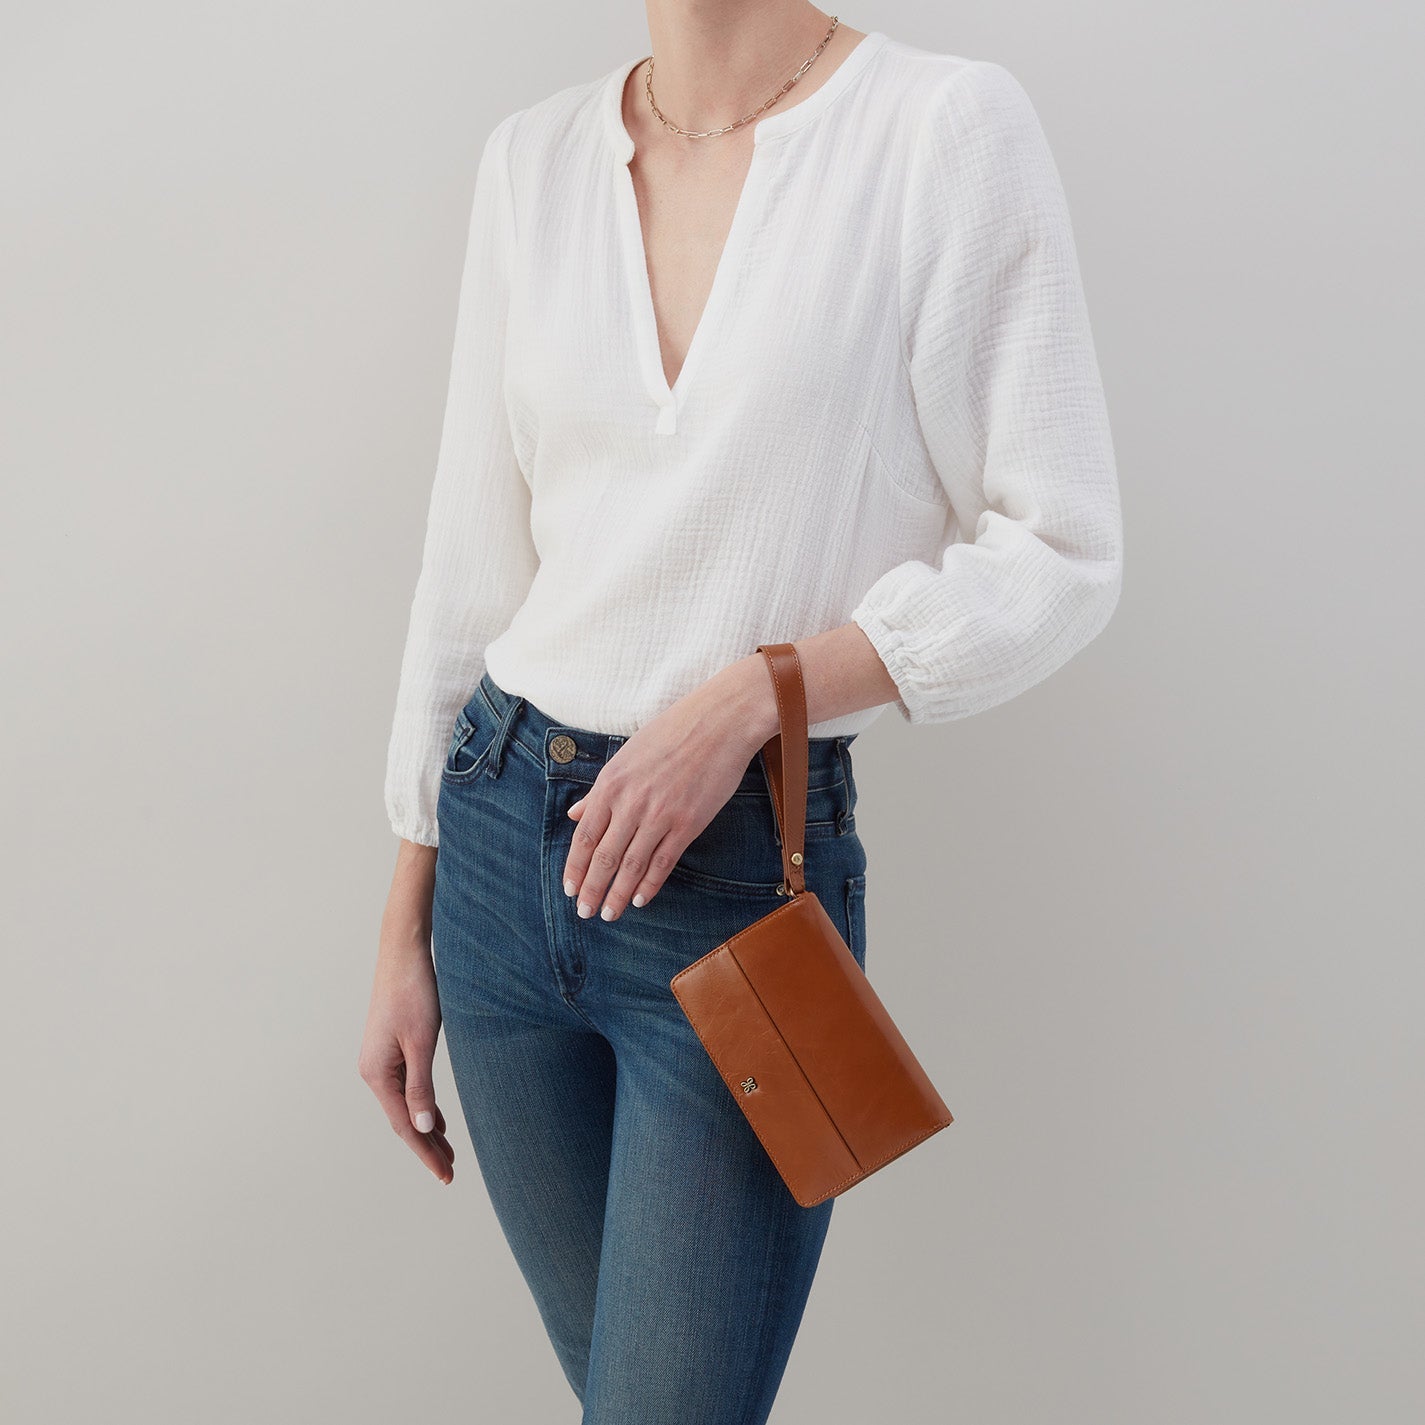 person wearing jeans and a white blouse with truffle jill wristlet on their arm.